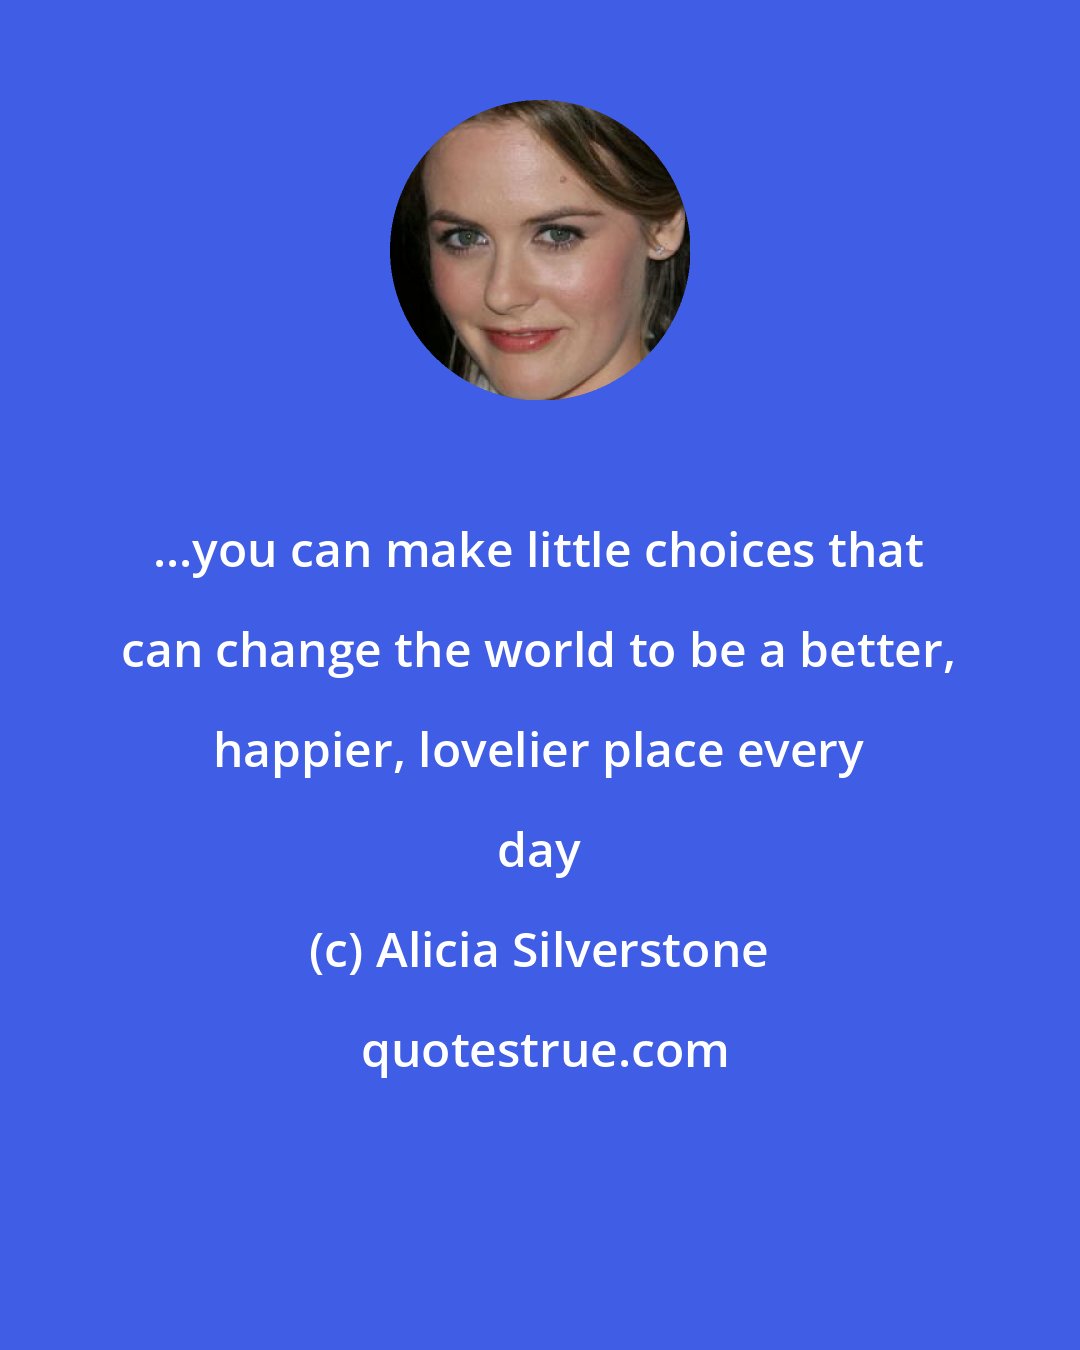 Alicia Silverstone: ...you can make little choices that can change the world to be a better, happier, lovelier place every day